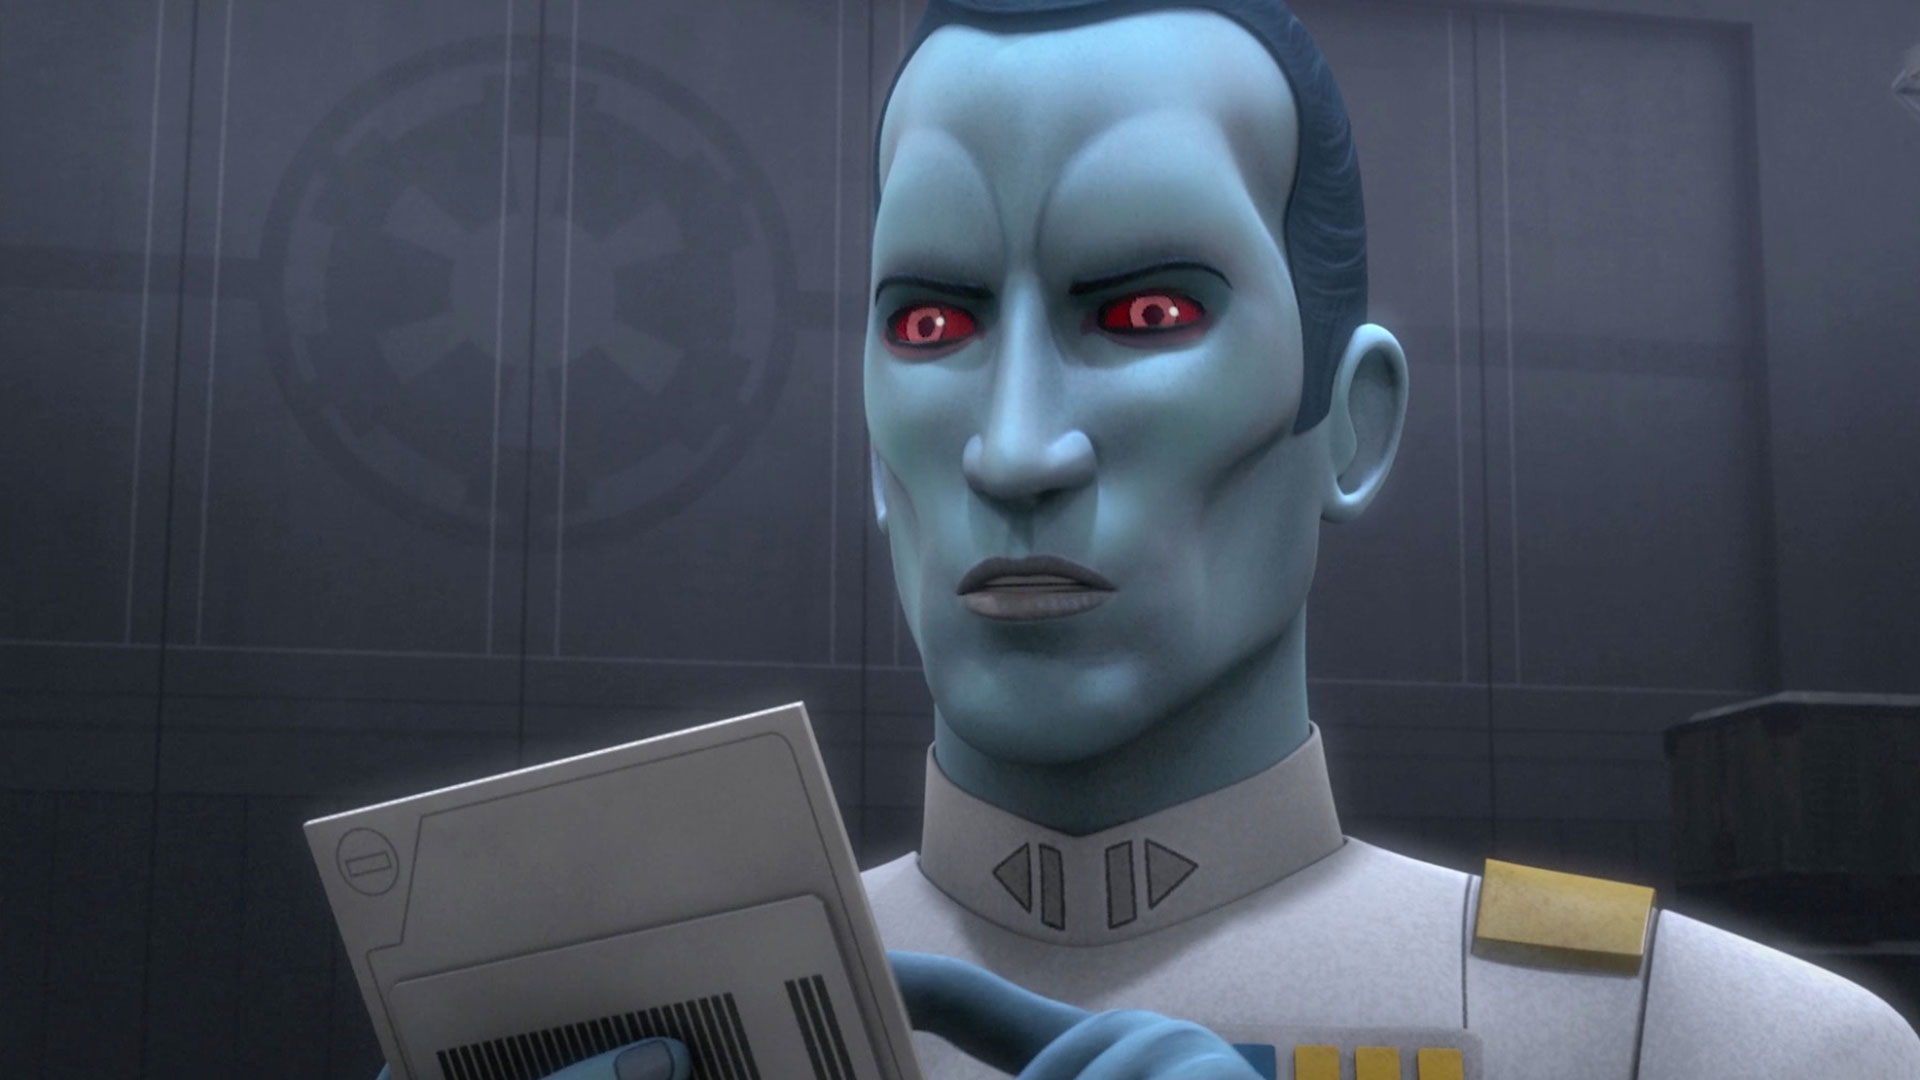 Star Wars Rebels: "Thrawn's Ruthlessness"